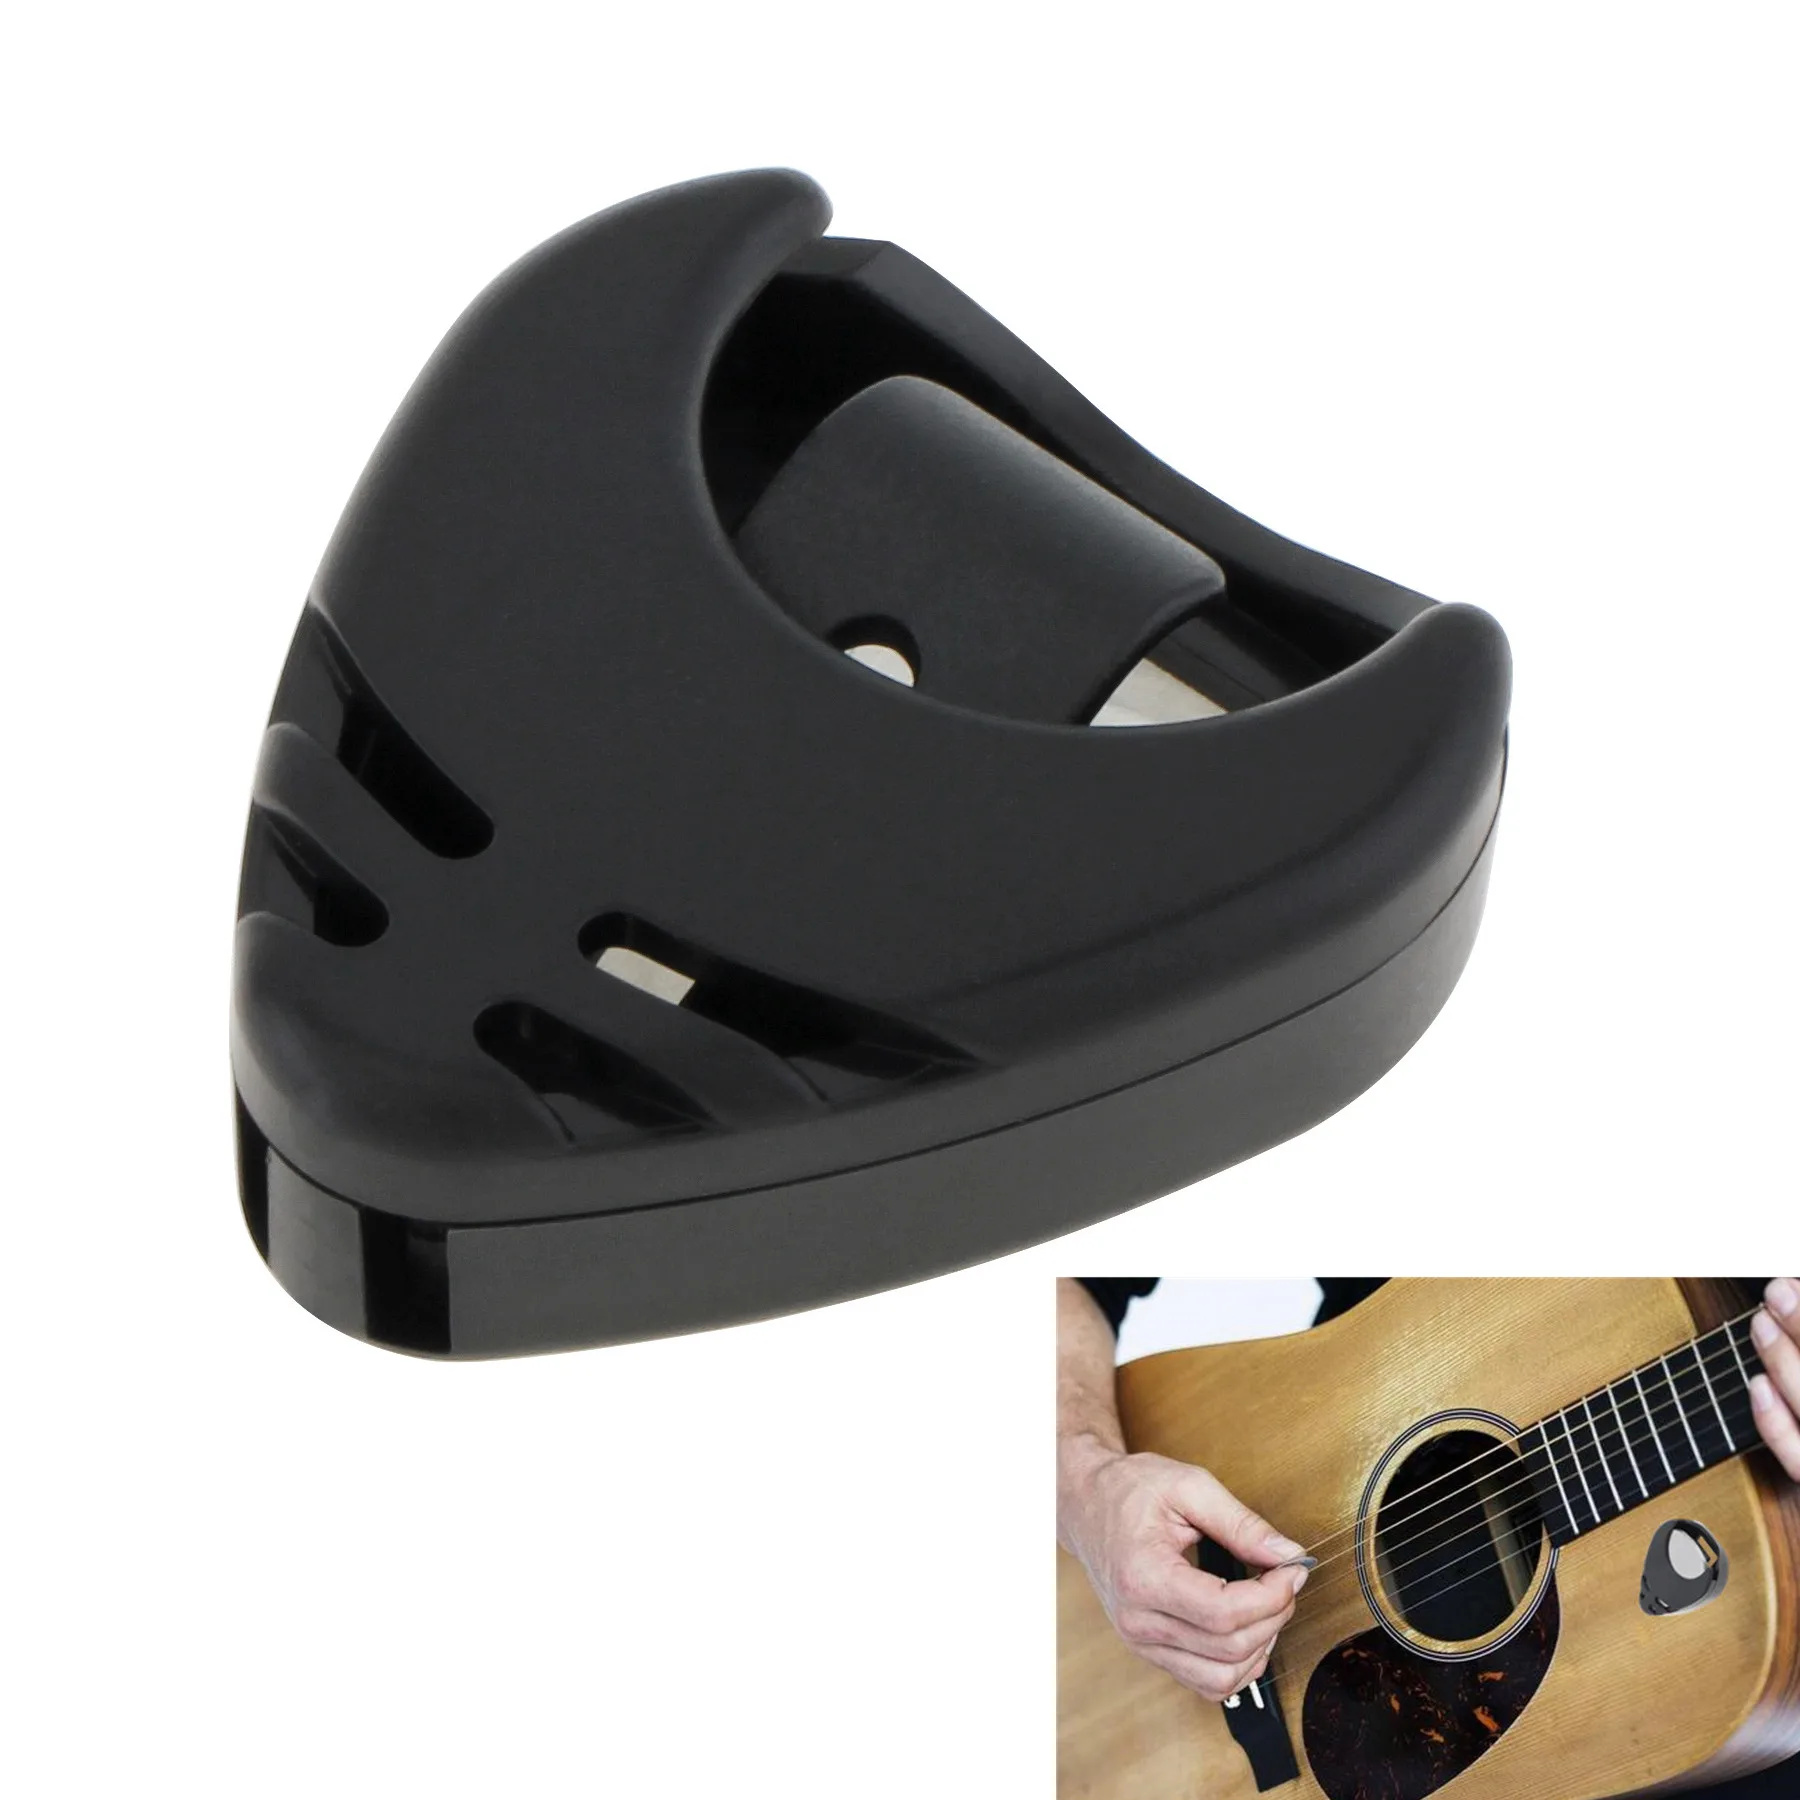 

Black Plastic Stick on Guitar Pick Holder for Acoustic Guitars / Bass / Ukulele with Adhesive Back, Convenient Picks Placement